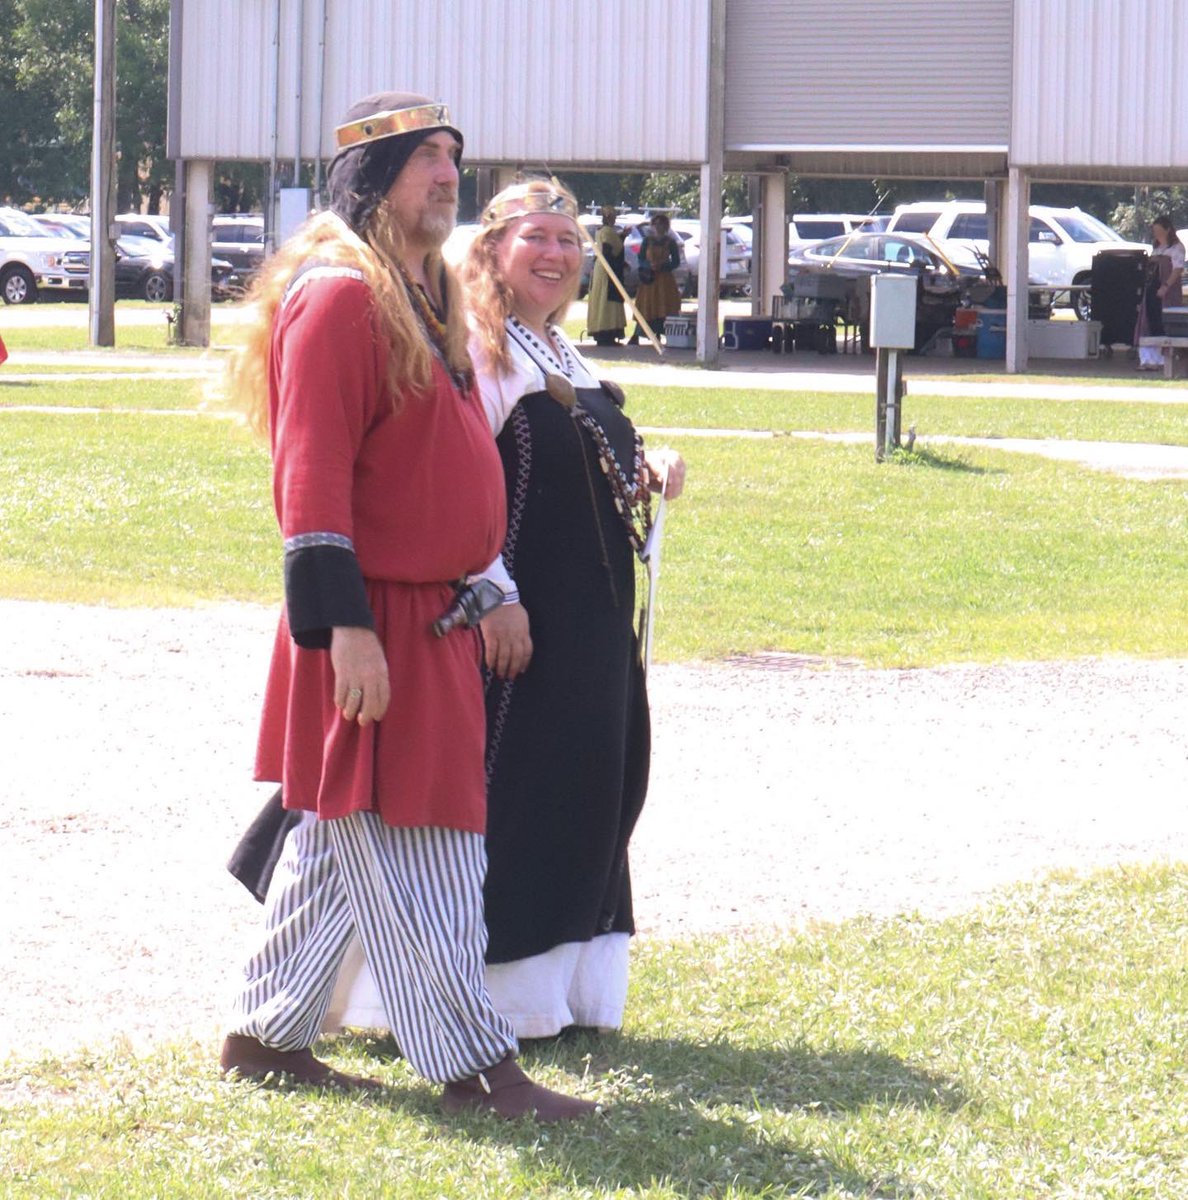 Bryn Gwlad was well represented and Ravensfort Defender this past weekend! Our Baron and Baroness looked fabulous, as usual. 

#BGatHome #SCAaustin #mySCA #medieval #viking #HistoricalRecreation